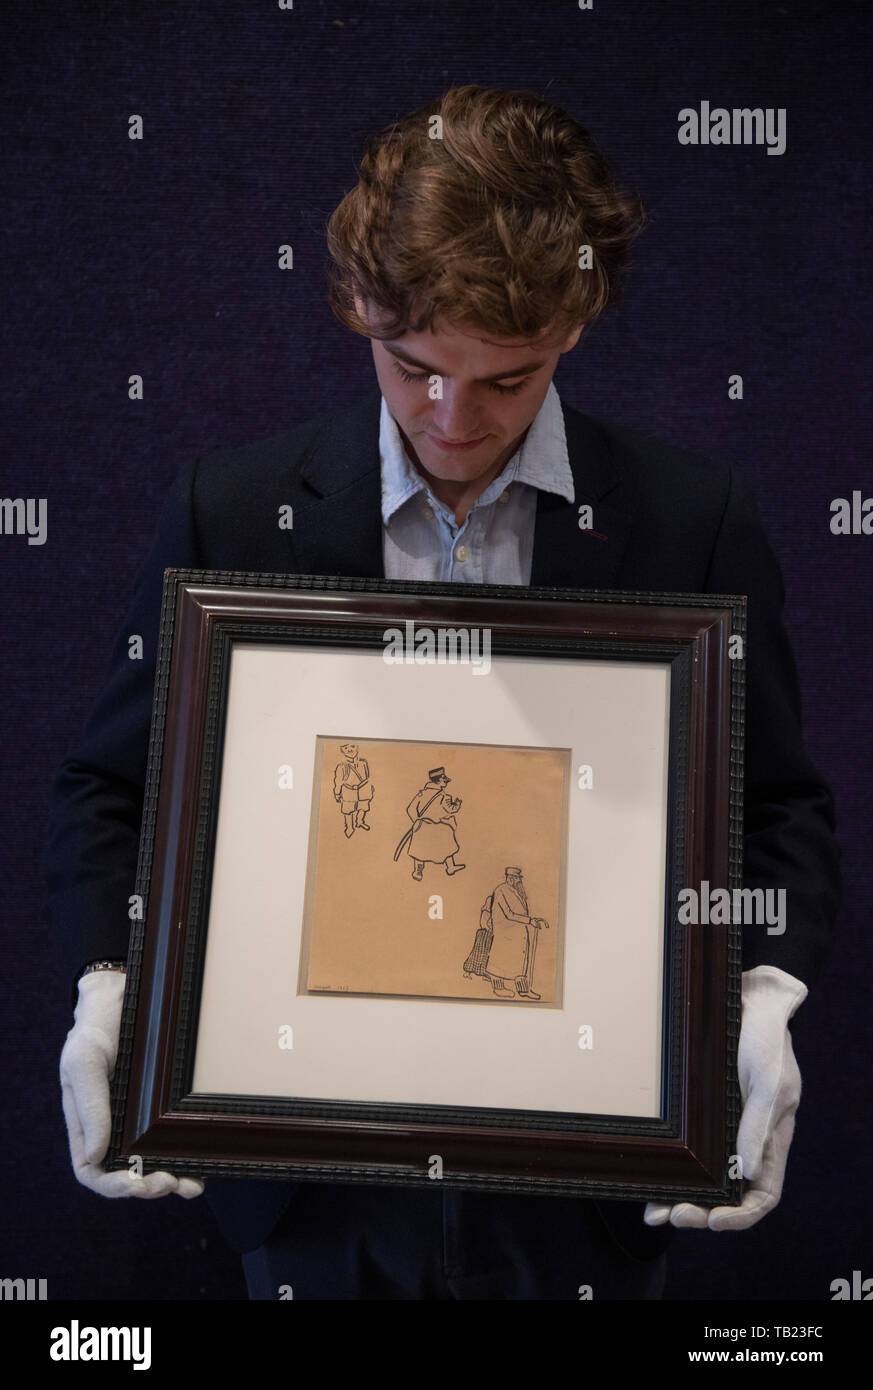 Bonhams, New Bond Street, London, UK. 29th May 2019. Preview of The Russian Sale, taking place on 5th June 2019. Image: Marc Chagall. Gendarmes Russes, 1908, estimate £8,000-12,000. Credit: Malcolm Park/Alamy Live News Stock Photo